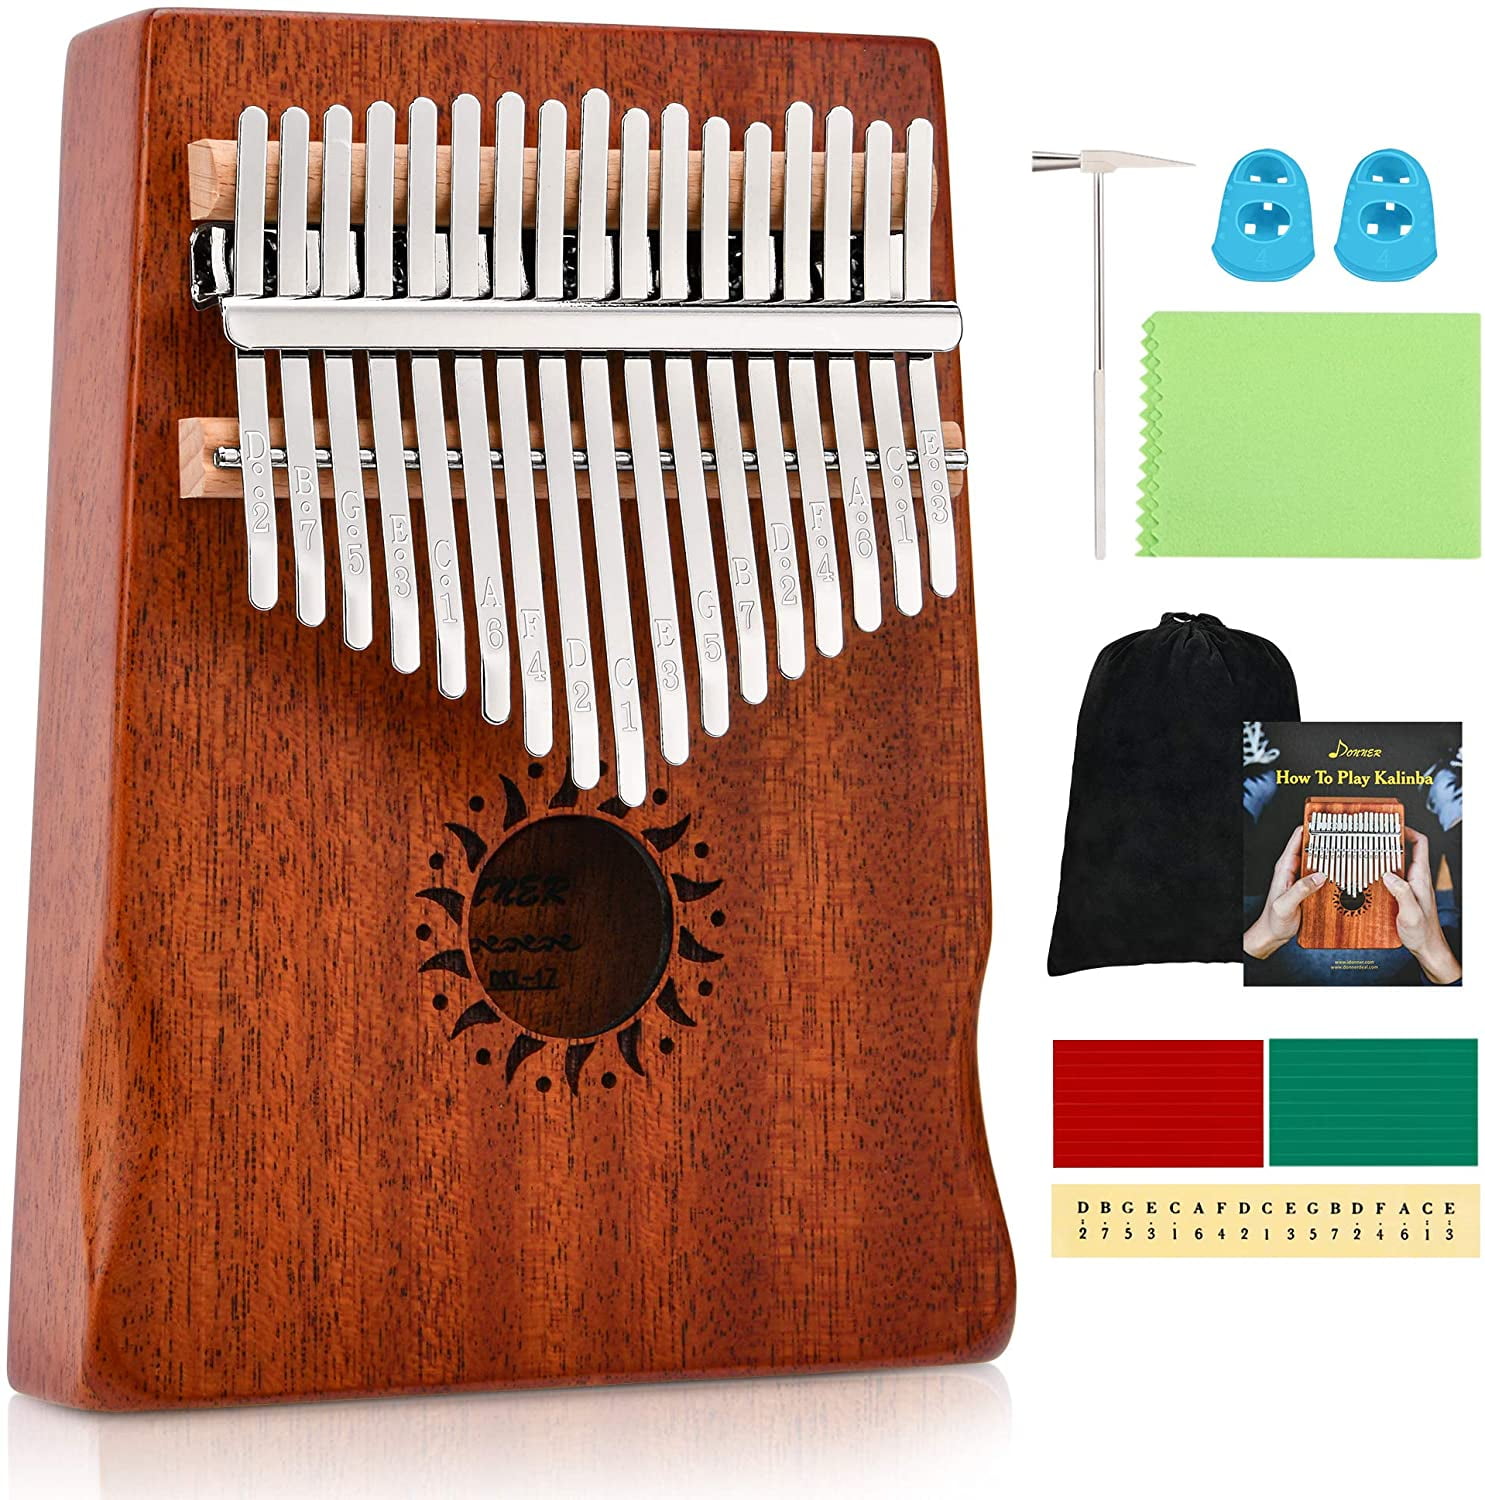 Case Kalimba Thumb Piano 17 Key Finger Piano Portable Mbria w/ Songbook Tuning Hammer Music Gifts for Adults Kids Beginners 